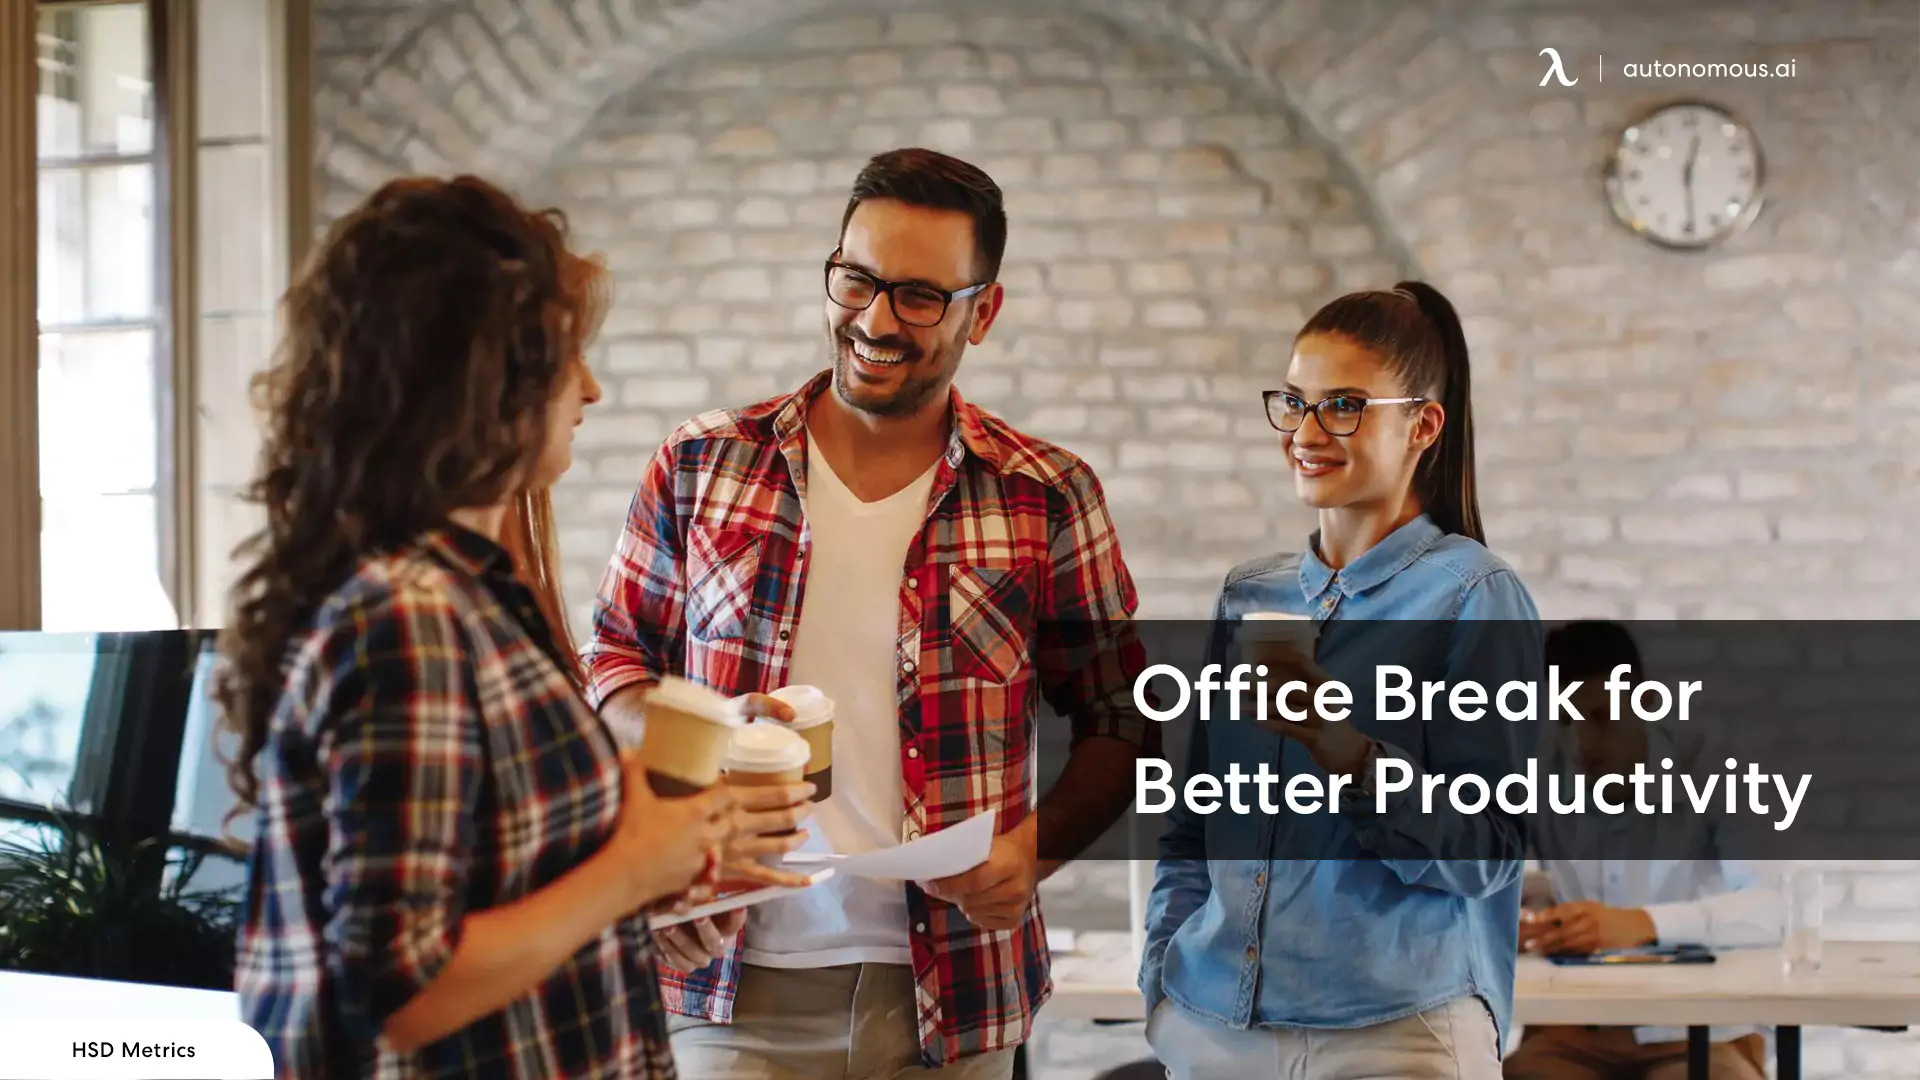 Empowering Office with Break Strategy for Productivity & Well Being